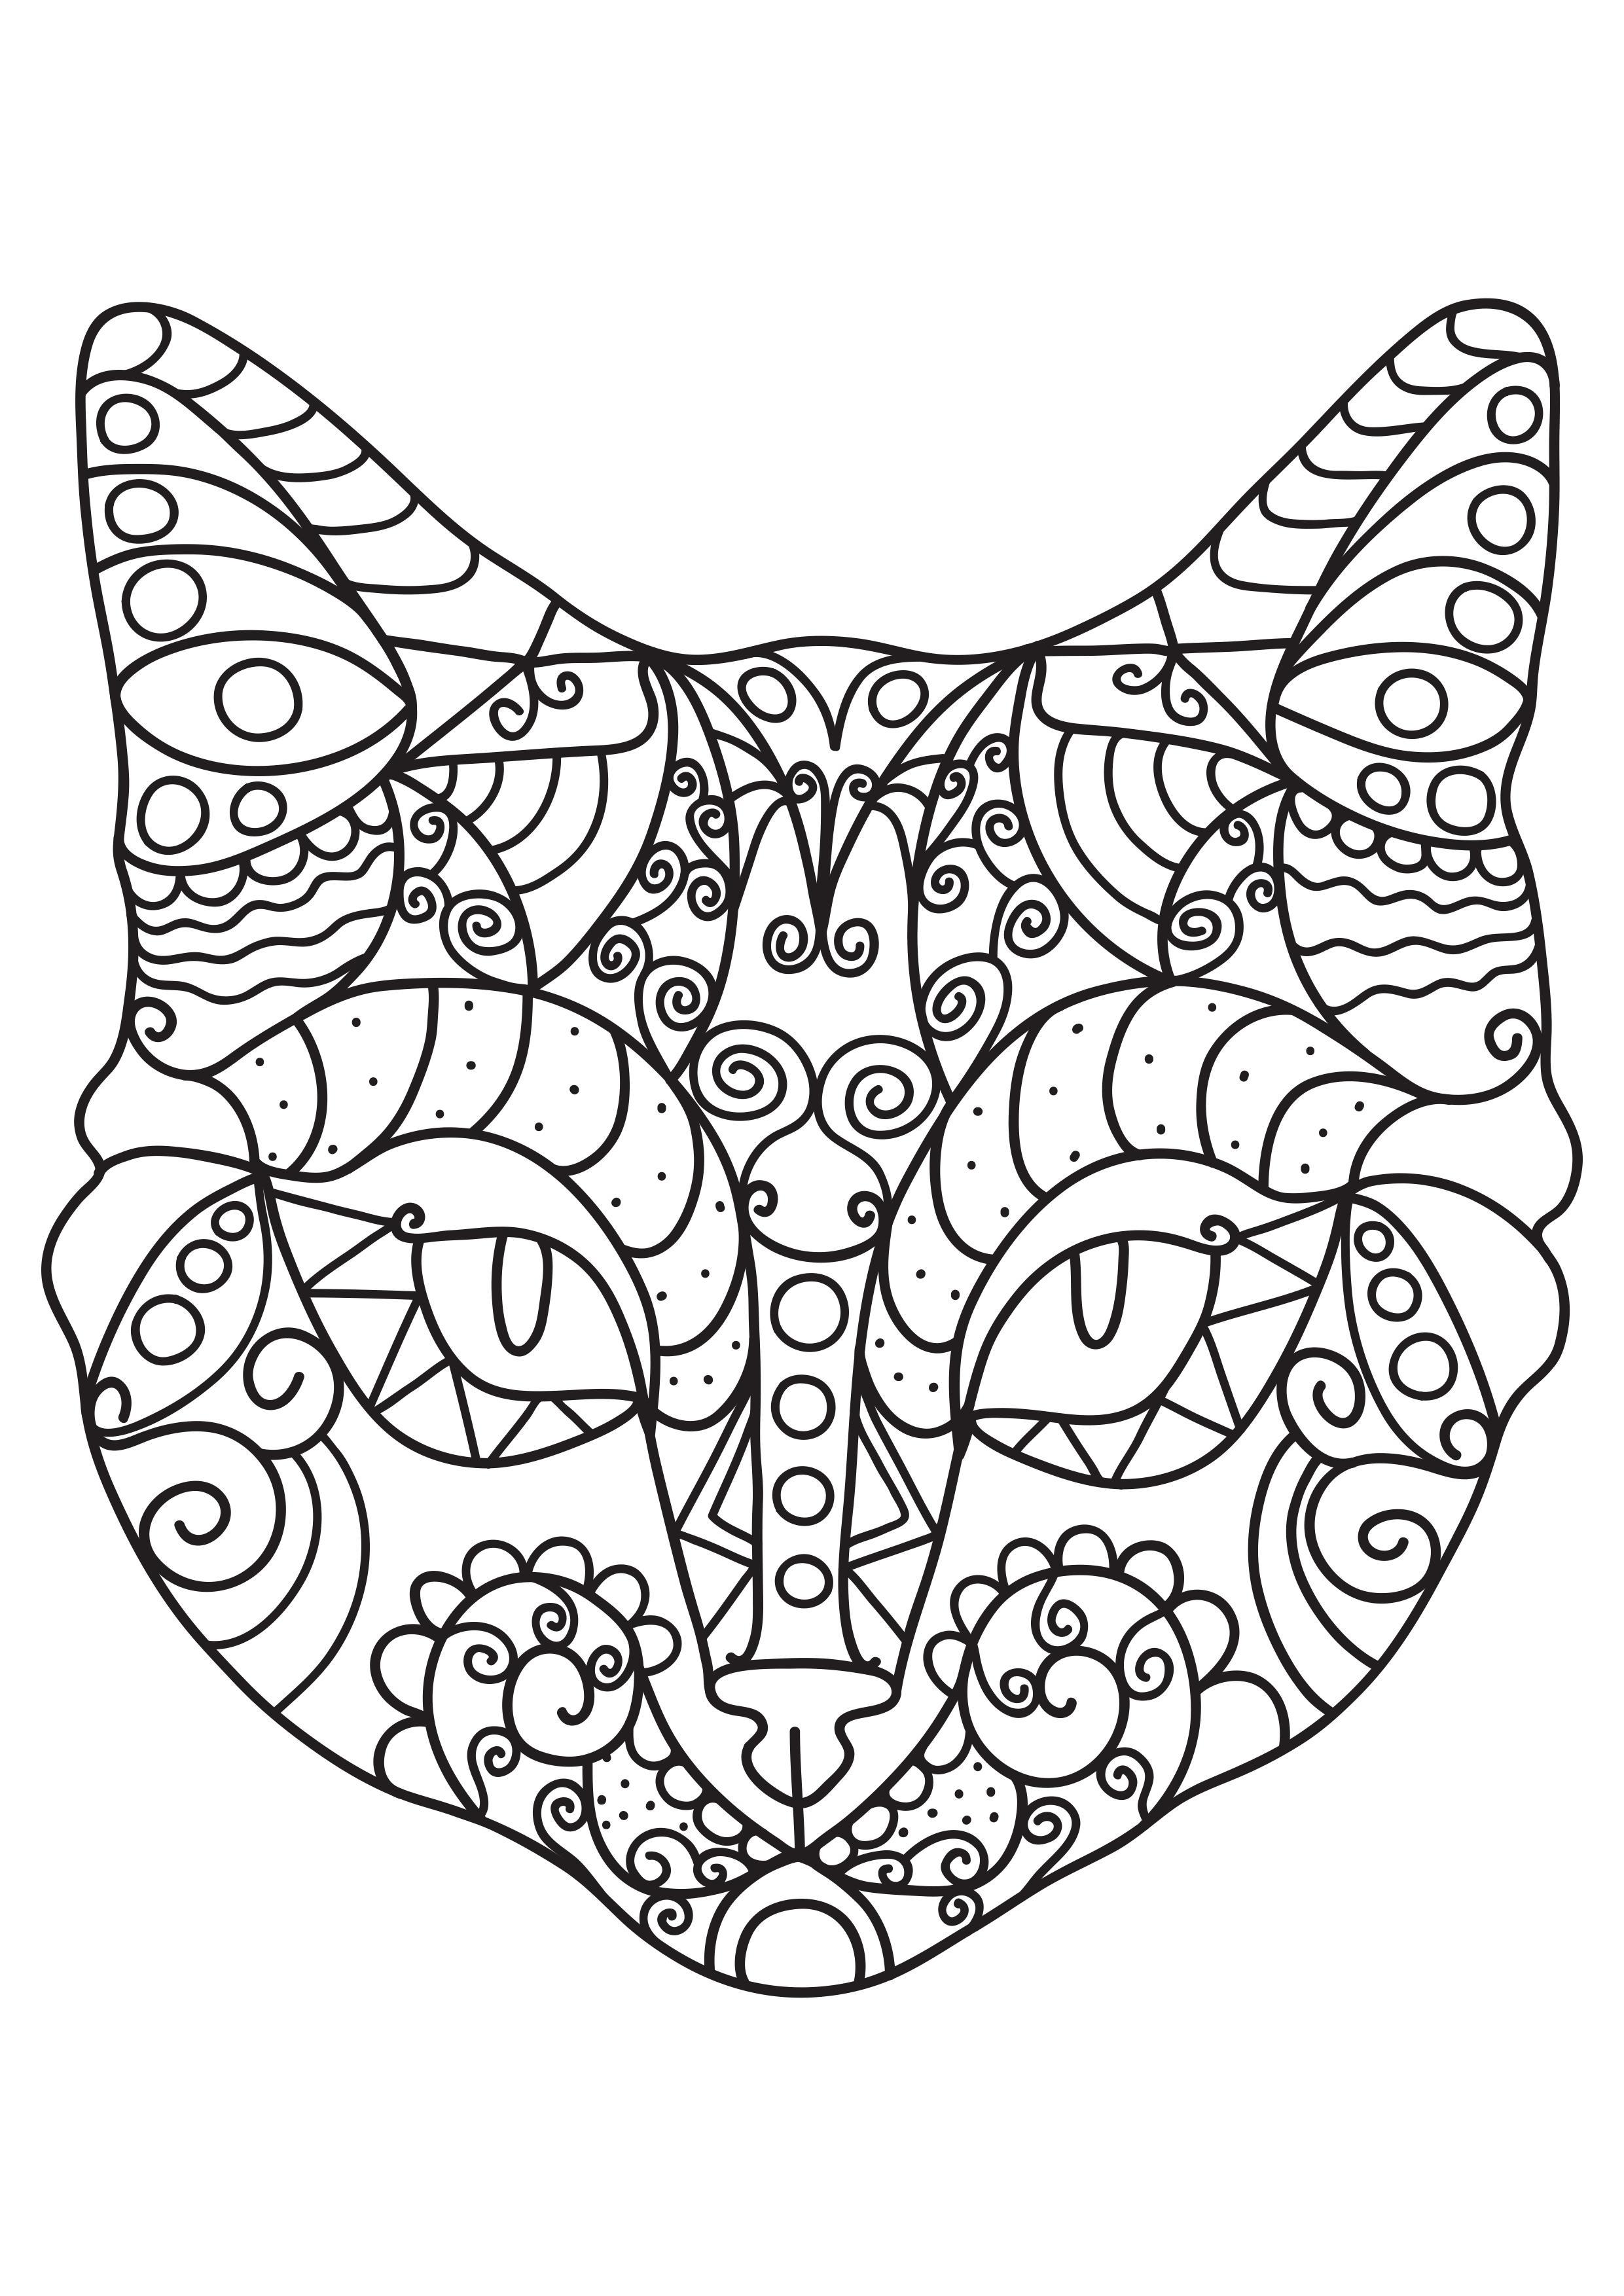 Coloring page cat